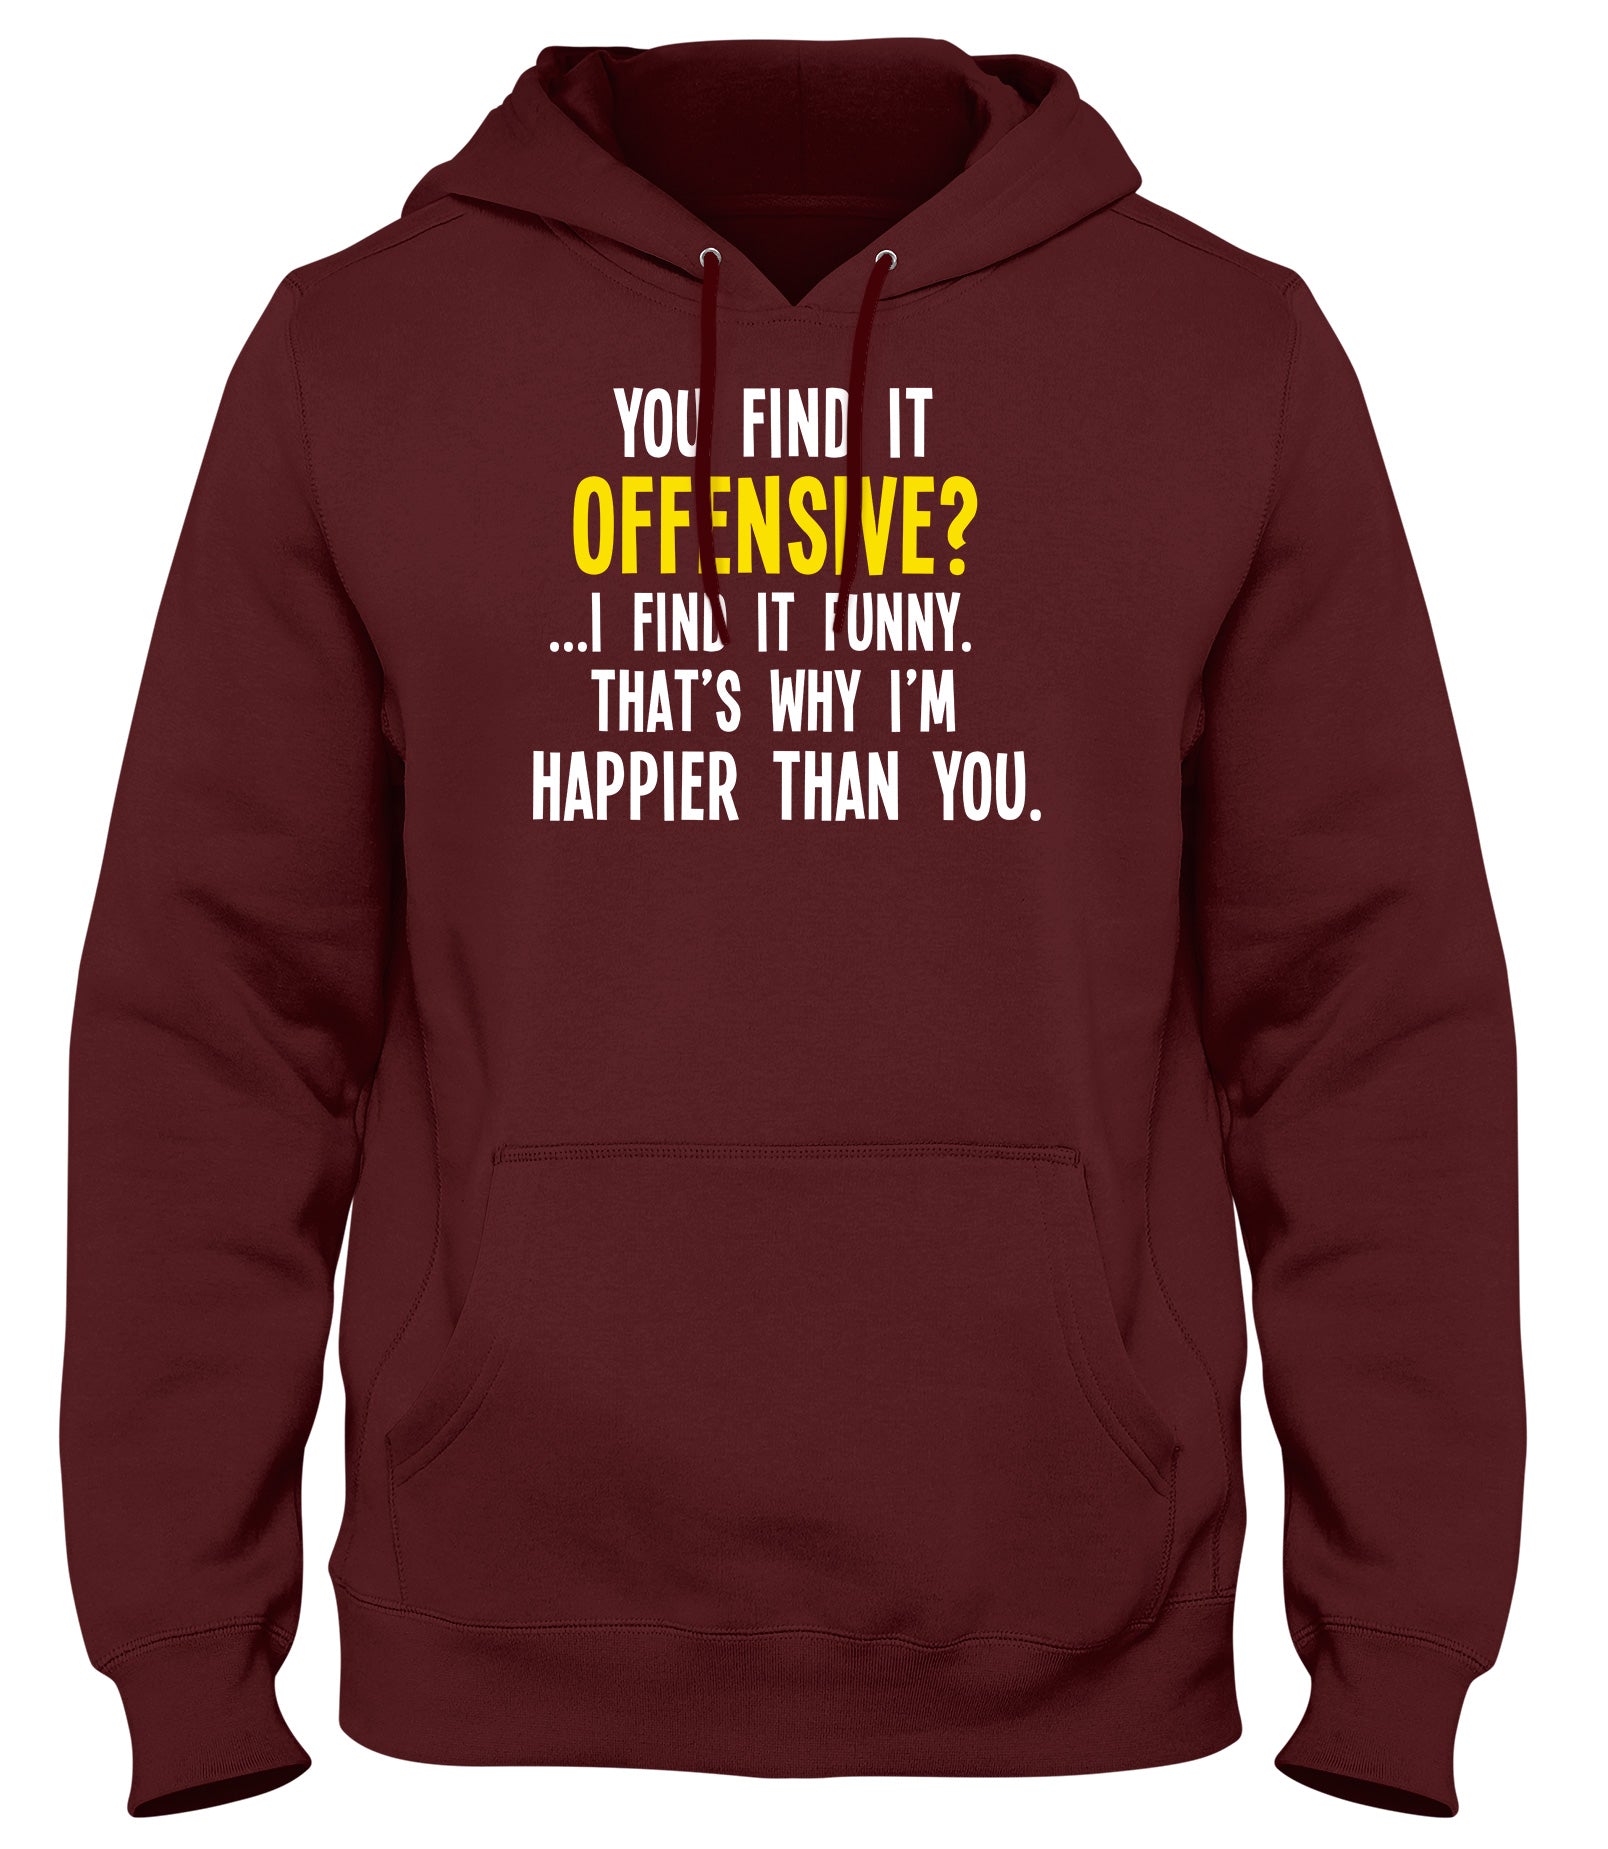 YOU FIND IT OFFENSIVE? I FIND IT FUNNY. THAT'S WHY I'M HAPPIER THAN YOU MENS WOMENS LADIES UNISEX FUNNY SLOGAN HOODIE